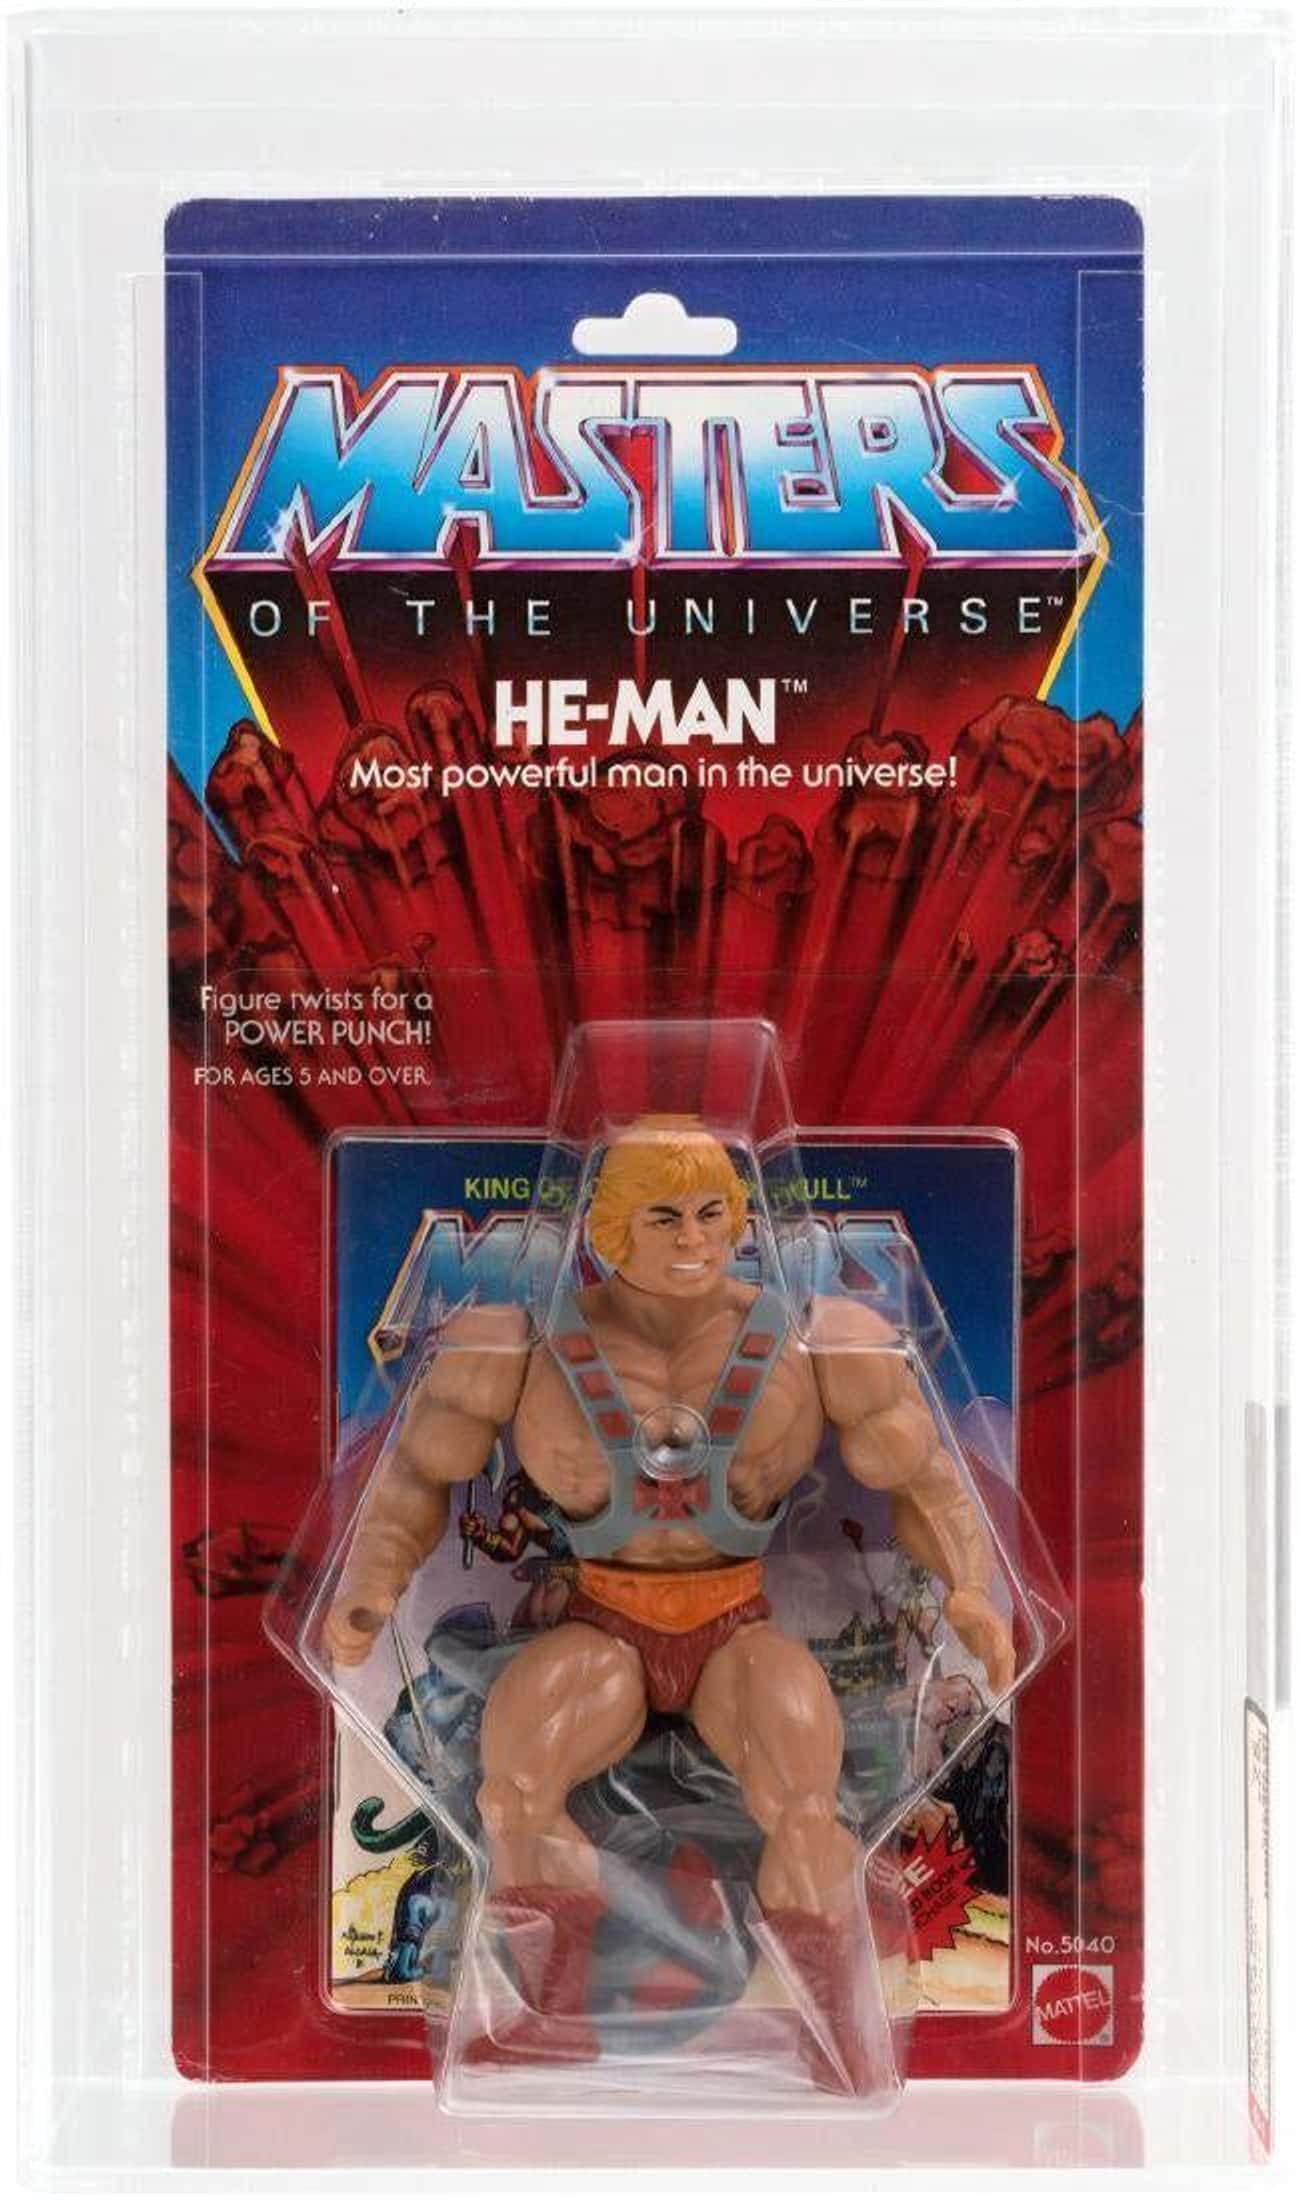 Classic He-Man Action Figures Are Outlifting The Competition By Selling For Insane Amounts On eBay